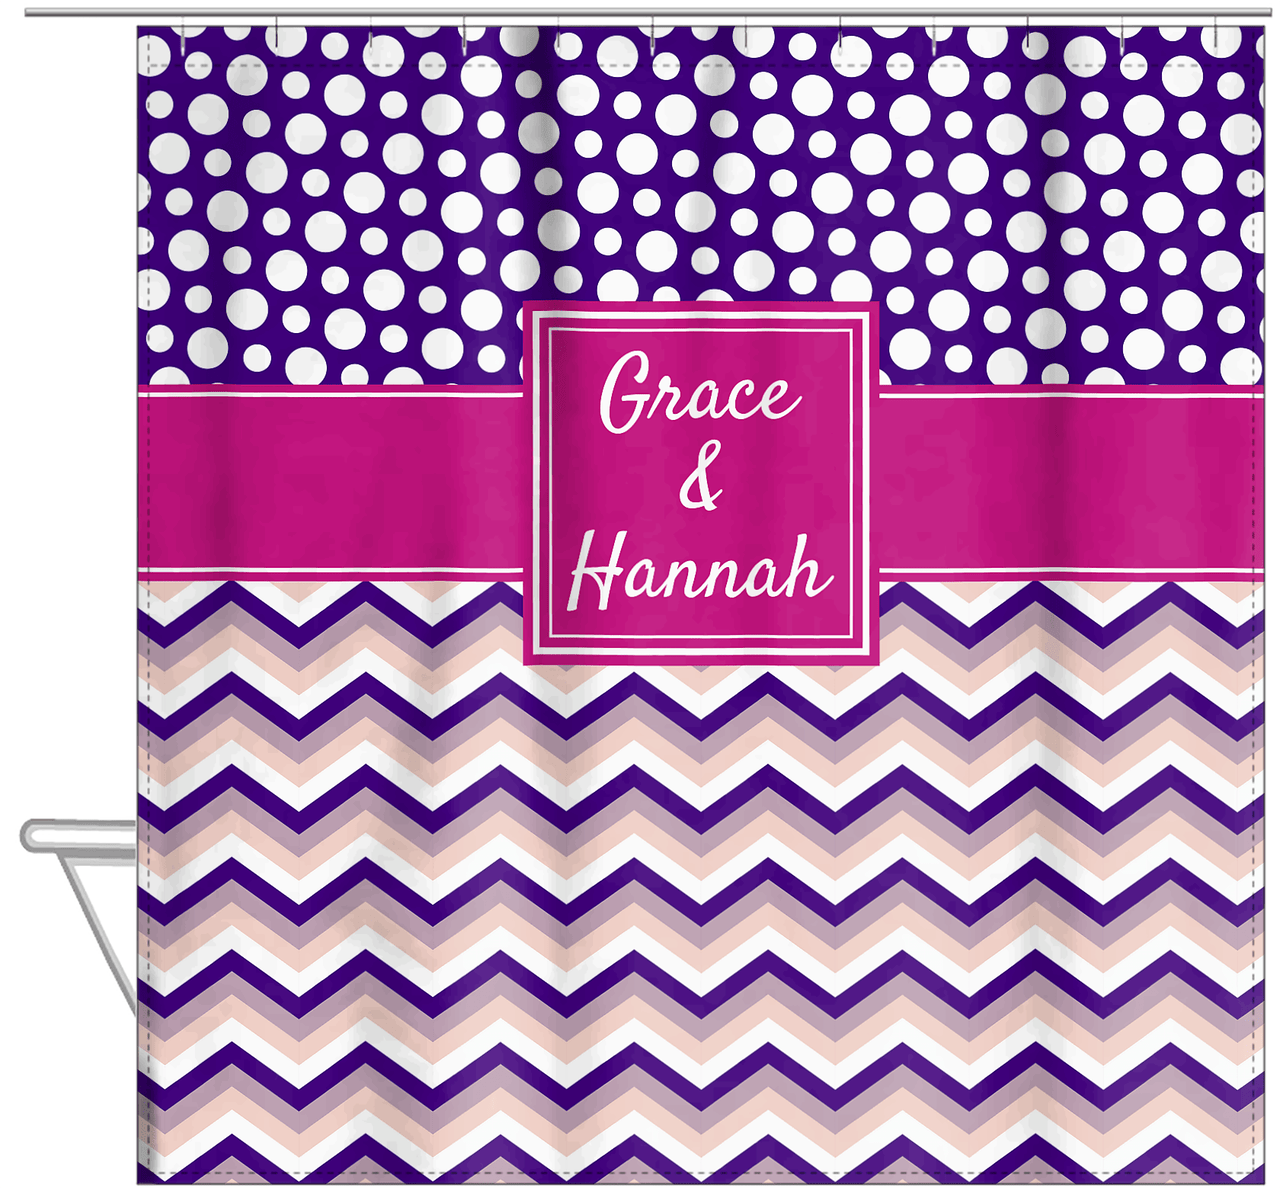 Personalized Polka Dots and Chevron IV Shower Curtain - Pink and Purple - Square Nameplate - Hanging View